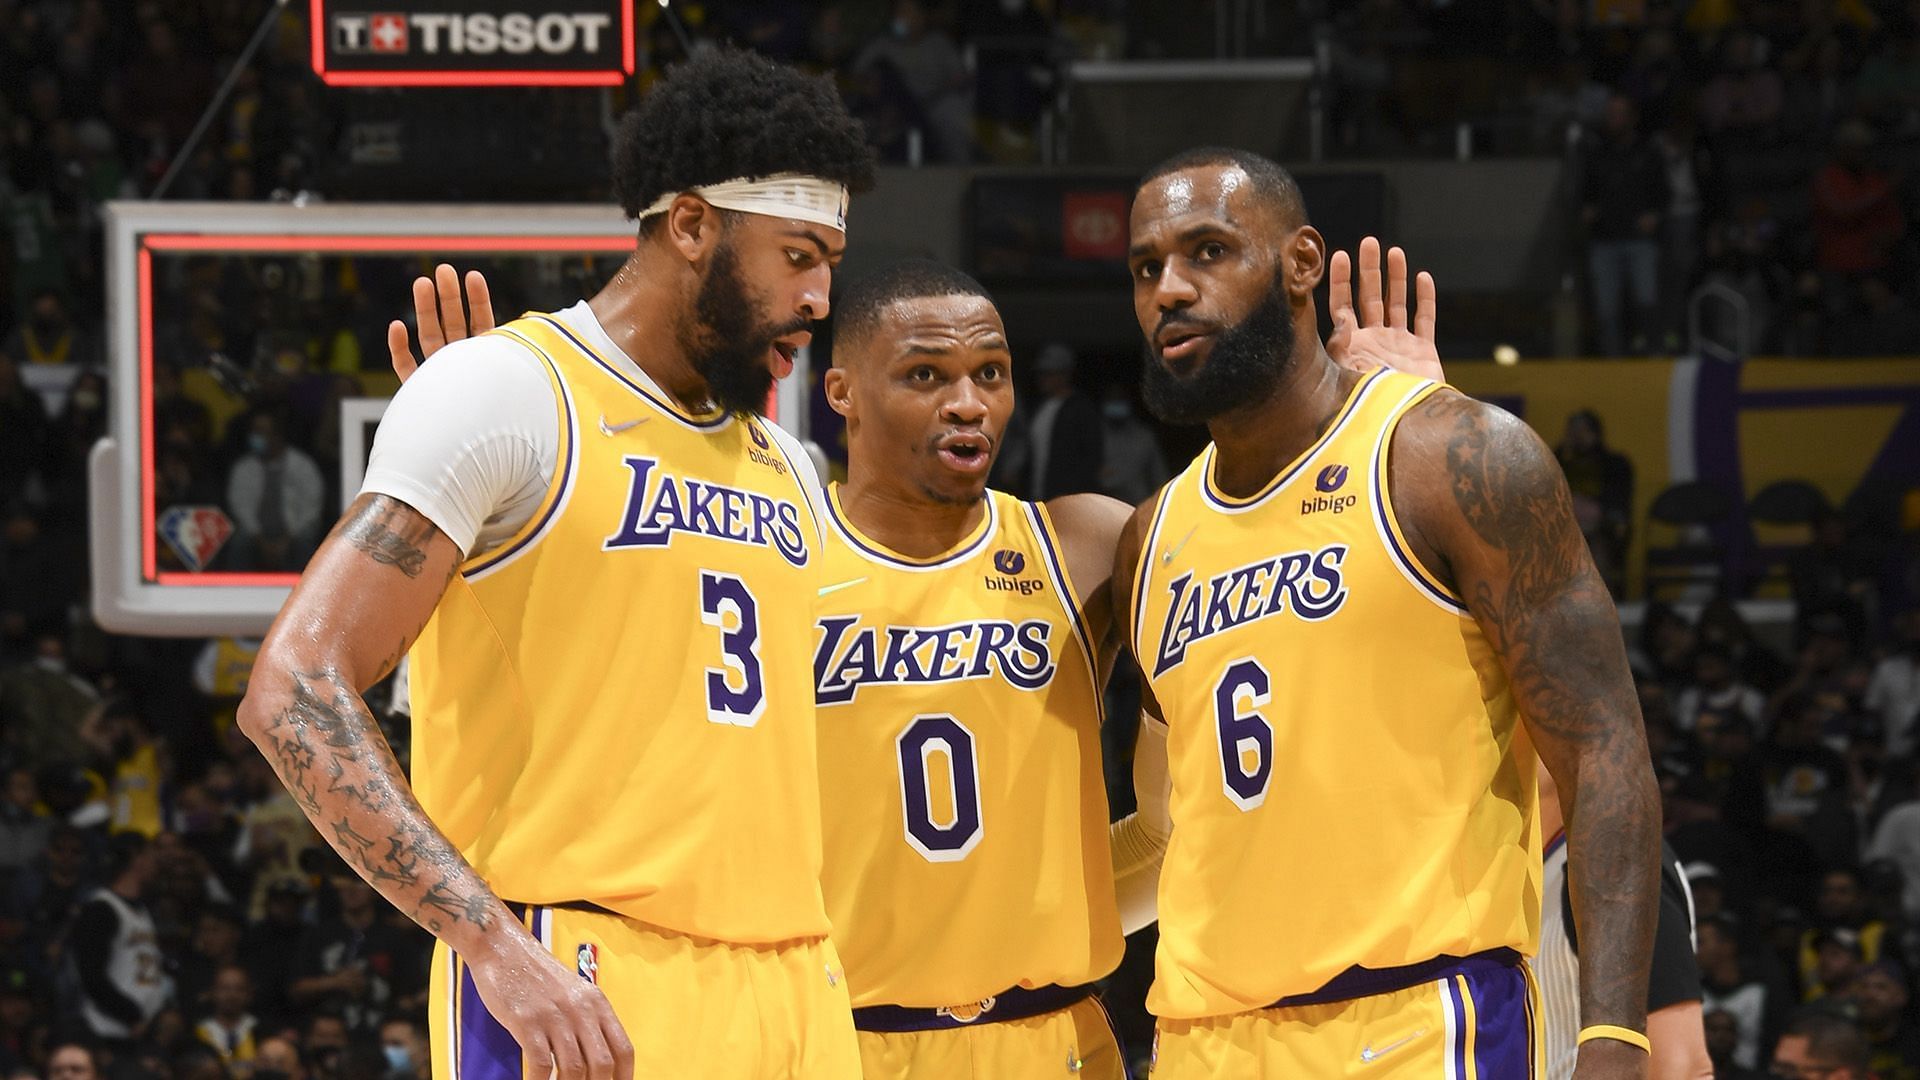 The LA Lakers are looking to make a storng push to nail a play-in spot. [Photo: NBA.com]